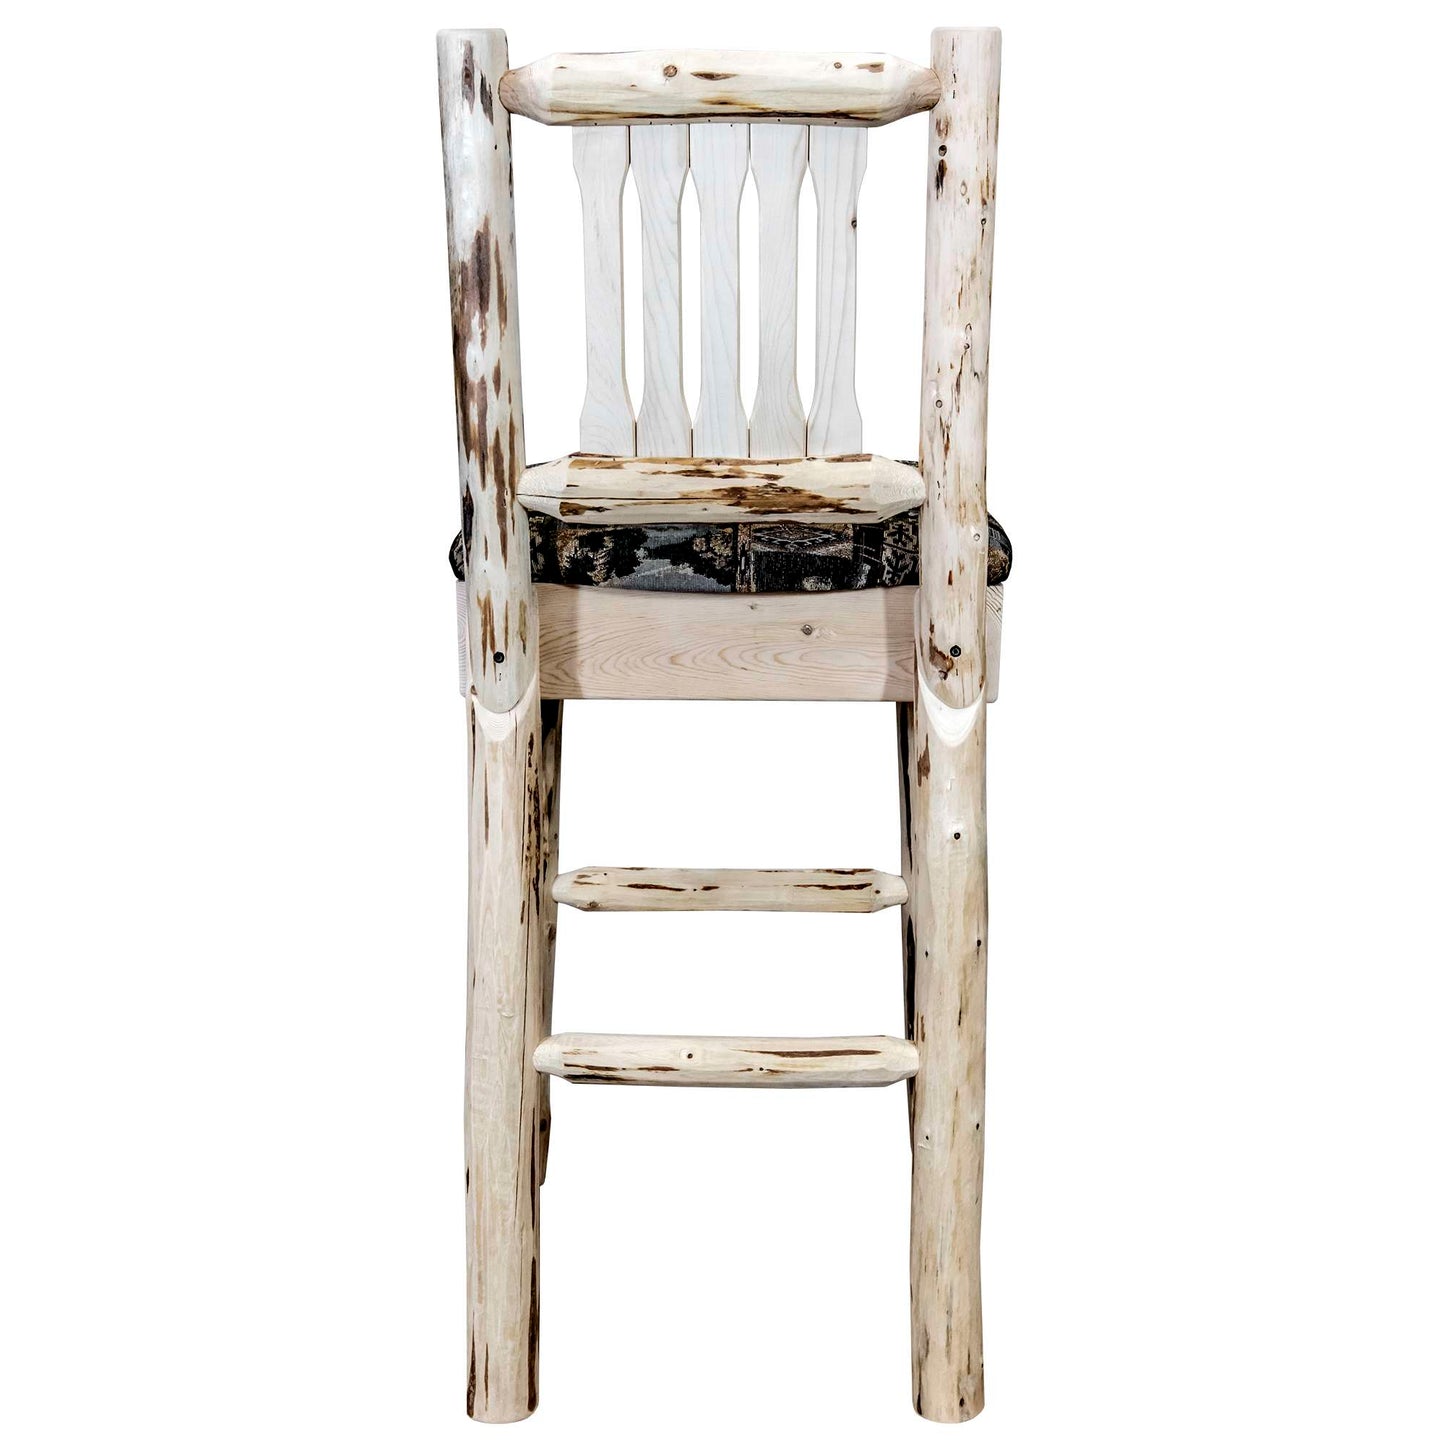 Montana Woodworks - Montana Collection Barstool w/ Back, Clear Lacquer Finish w/ Upholstered Seat, Woodland Pattern  - 44 in